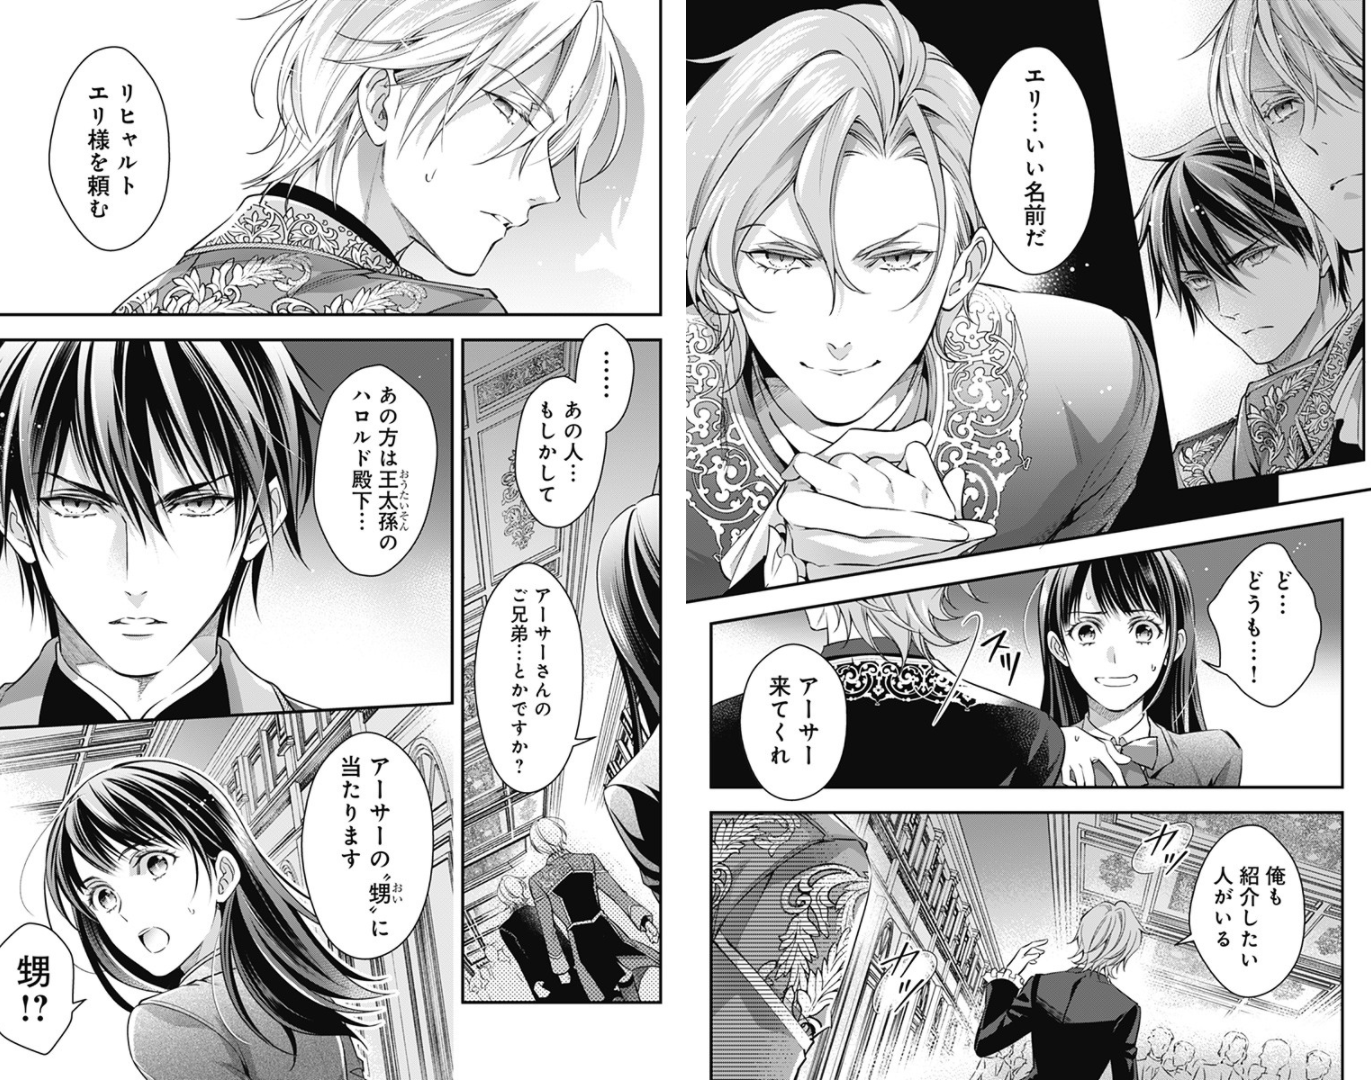 X 上的 Ikémen fangirl：「World's end harem Britannia Lumiere  (#終末のハーレムBritanniaLumiere) Story by: LINK #Manga: Kira Etou In a world of  men, the girl was taken there with 4 women!? To save this world